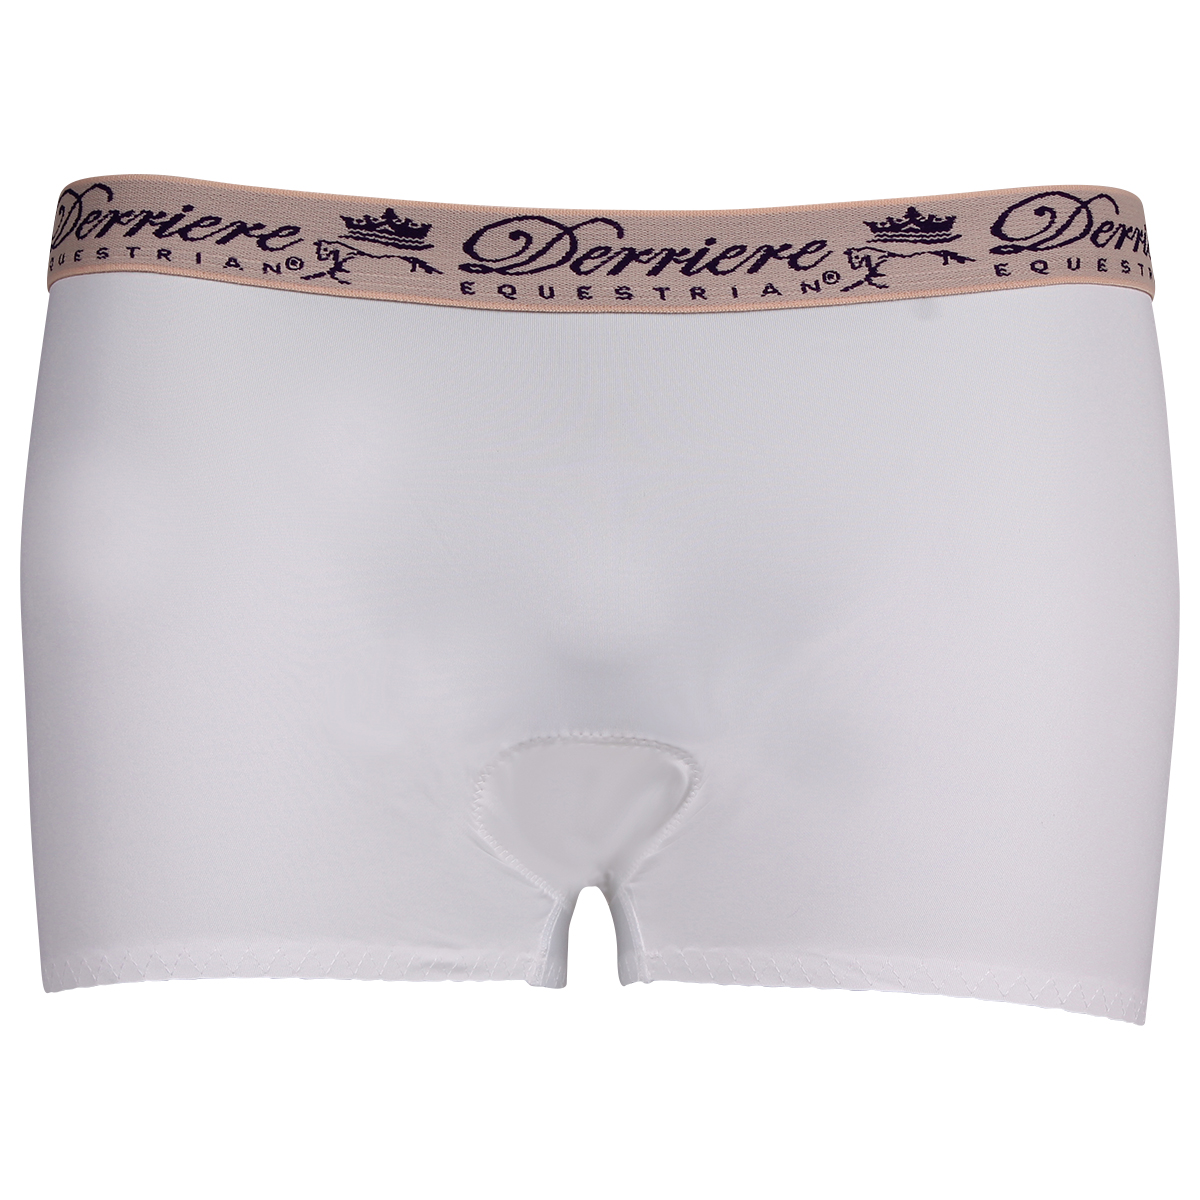 Shorty Derriere Equestrian Padded Female, S in wit